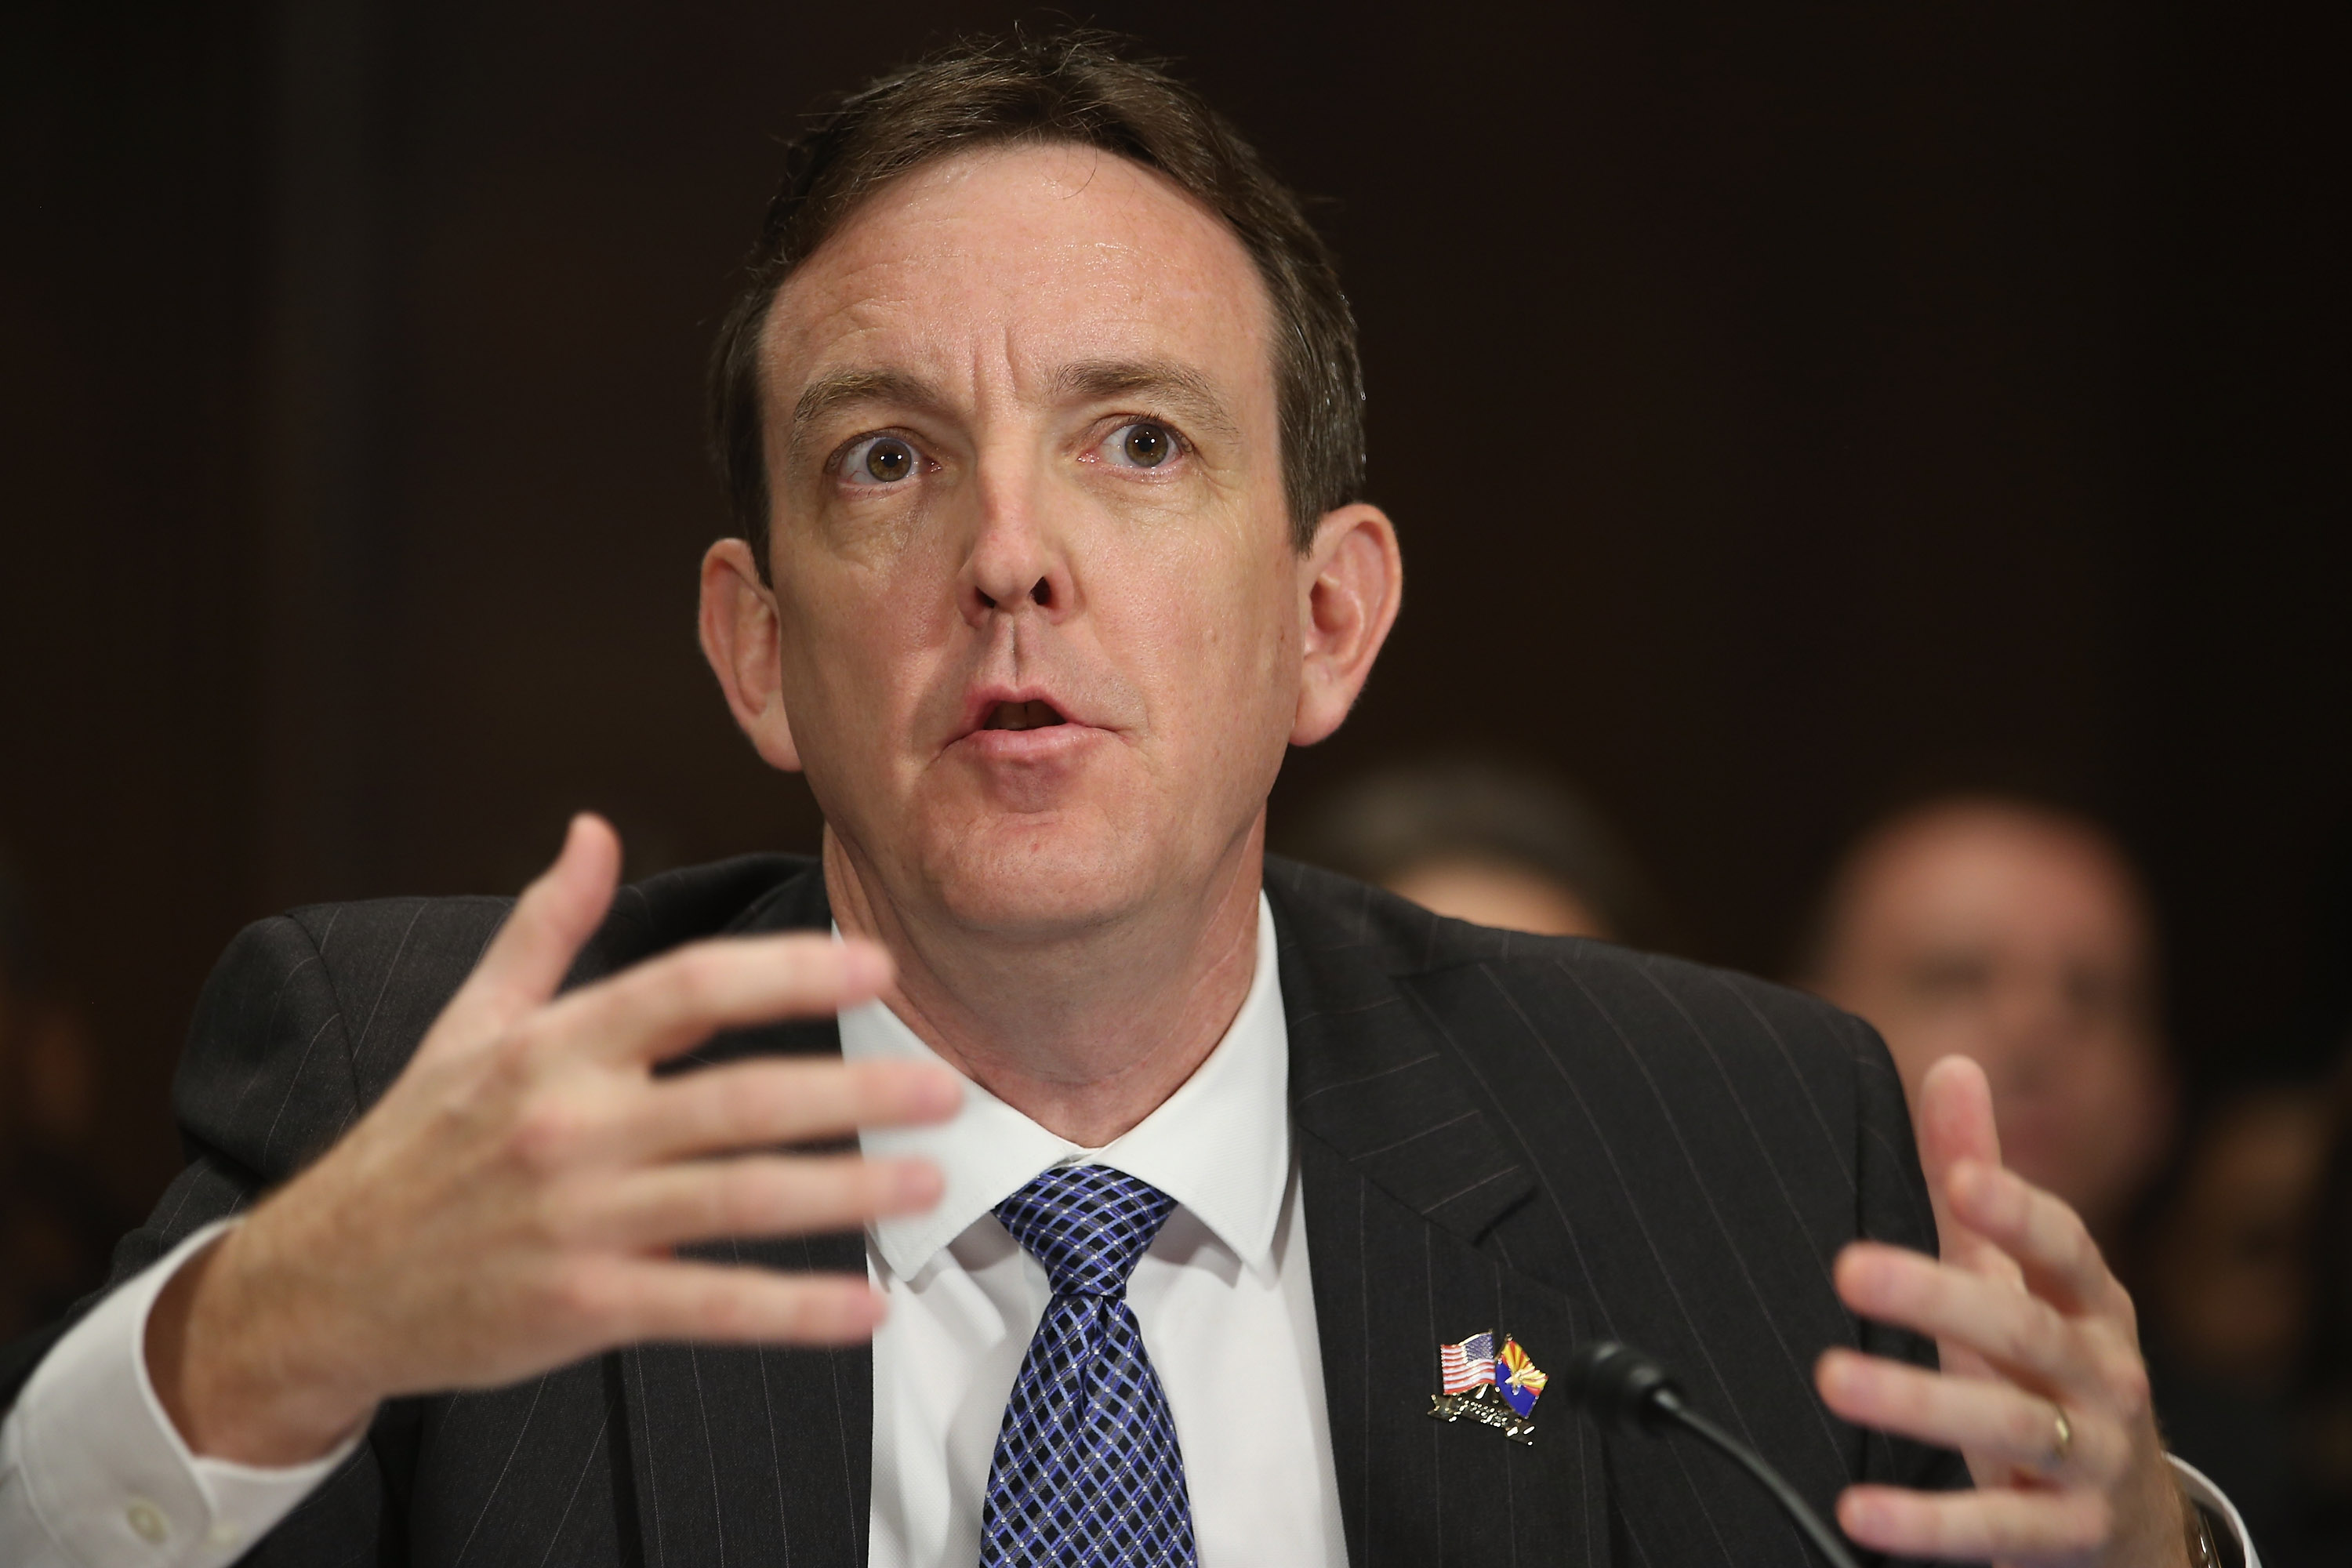 Arizona Secretary of State Ken Bennett testifies before the Senate Judiciary Committee about voter rights at the Dirksen Senate Office Building on Capitol Hill December 19, 2012 in Washington, D.C. (Chip Somodevilla—Getty Images)